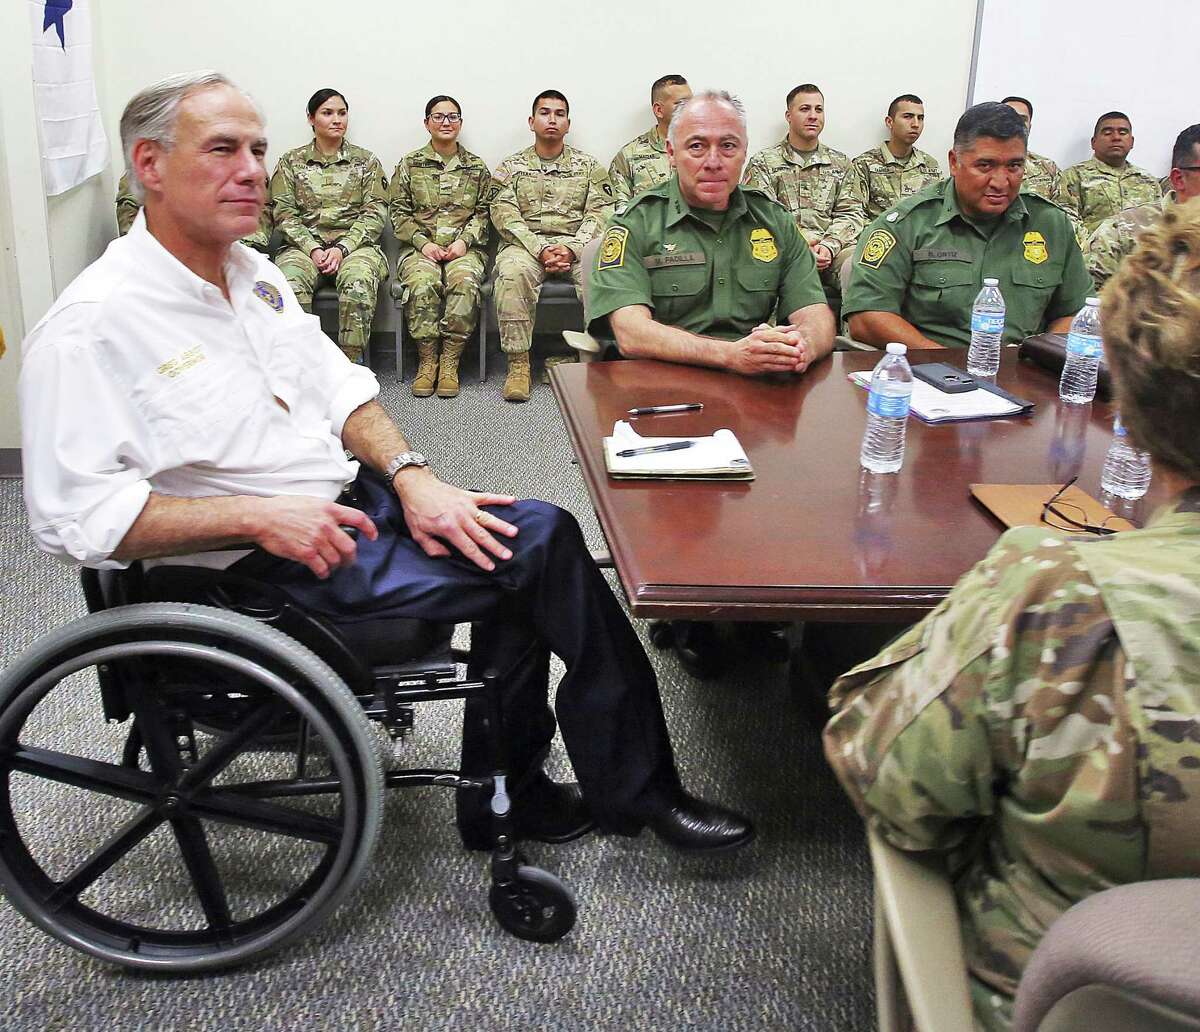 Gov. Greg Abbott, left, talks with leaders of the Texas National Guard and the Border Patrol at the Texas National Guard Armory on April 12 in Weslaco. Abbott announced that there will be an increase of 1,000 Texas National Guard on the southern border with Mexico.